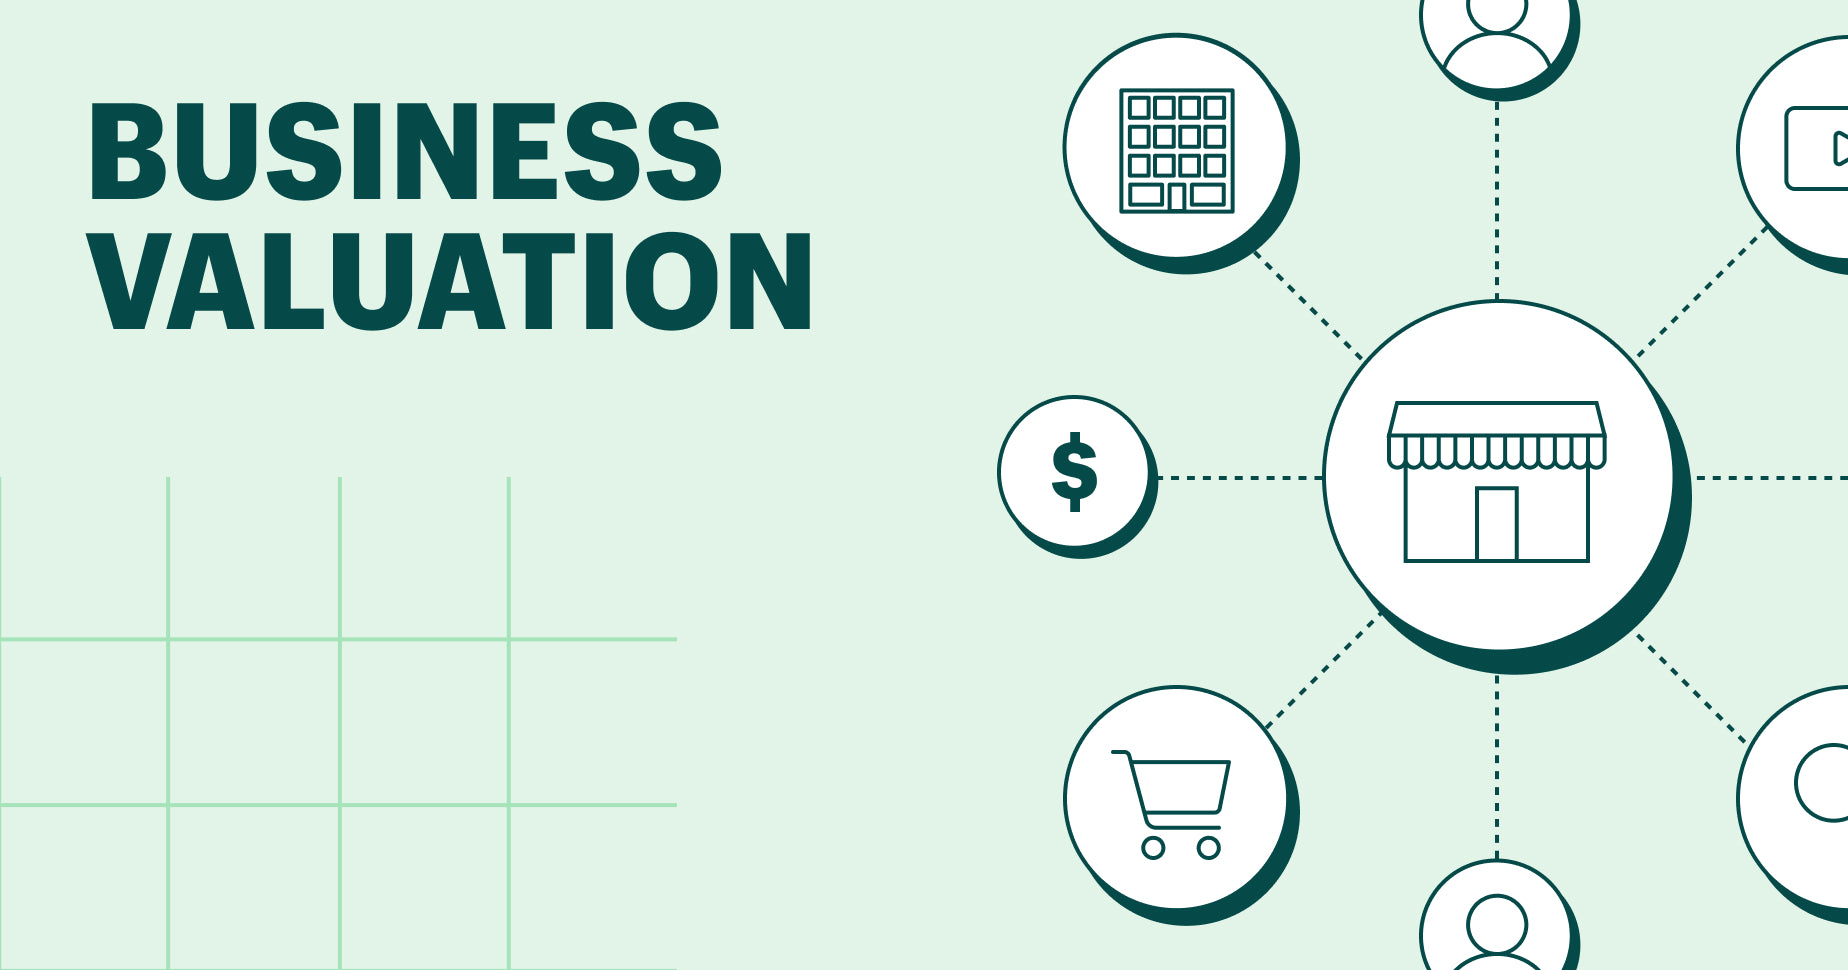 Business Valuation: How To Calculate the Value of Your Business